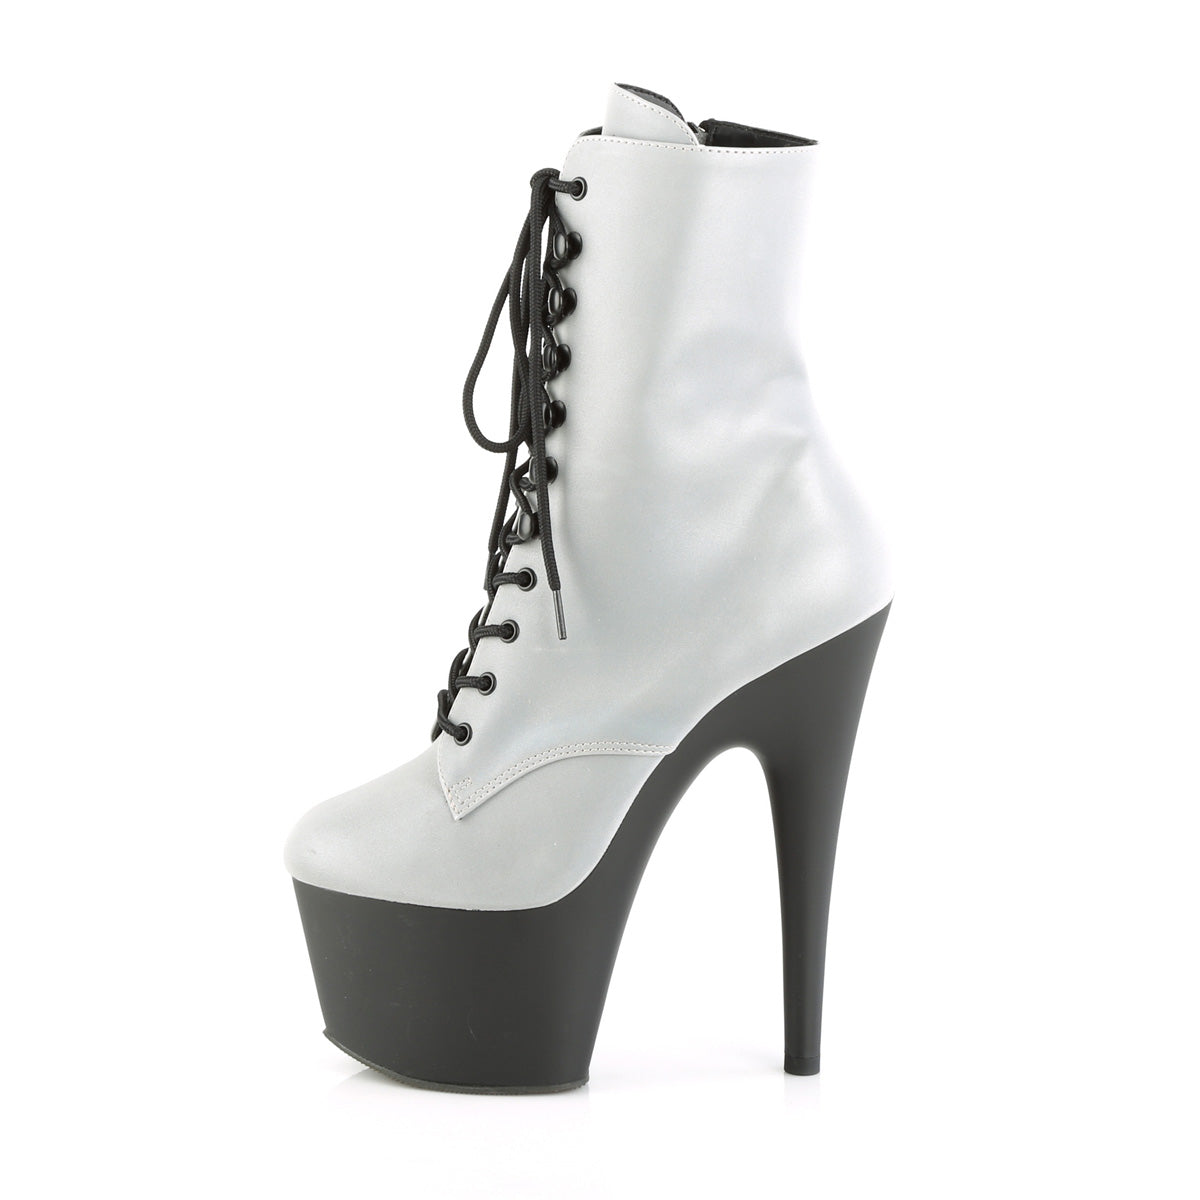 ADORE-1020REFL Pleaser Pole Dancing Shoes Ankle Boots Pleasers - Sexy Shoes Pole Dance Heels